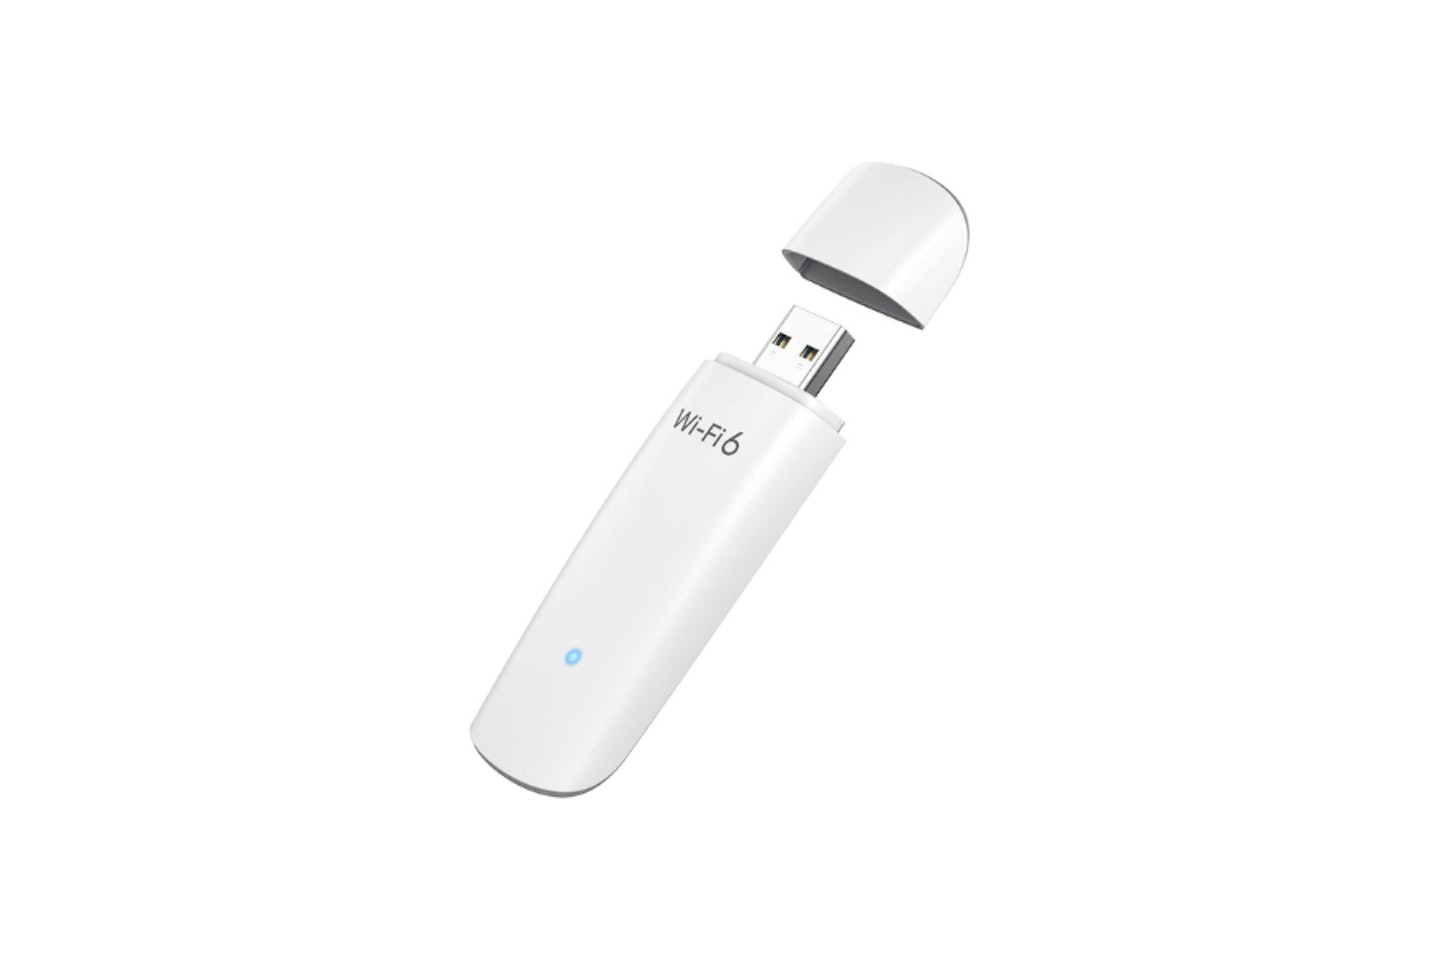 ioGiant AX1800 WiFi Dongle for PC